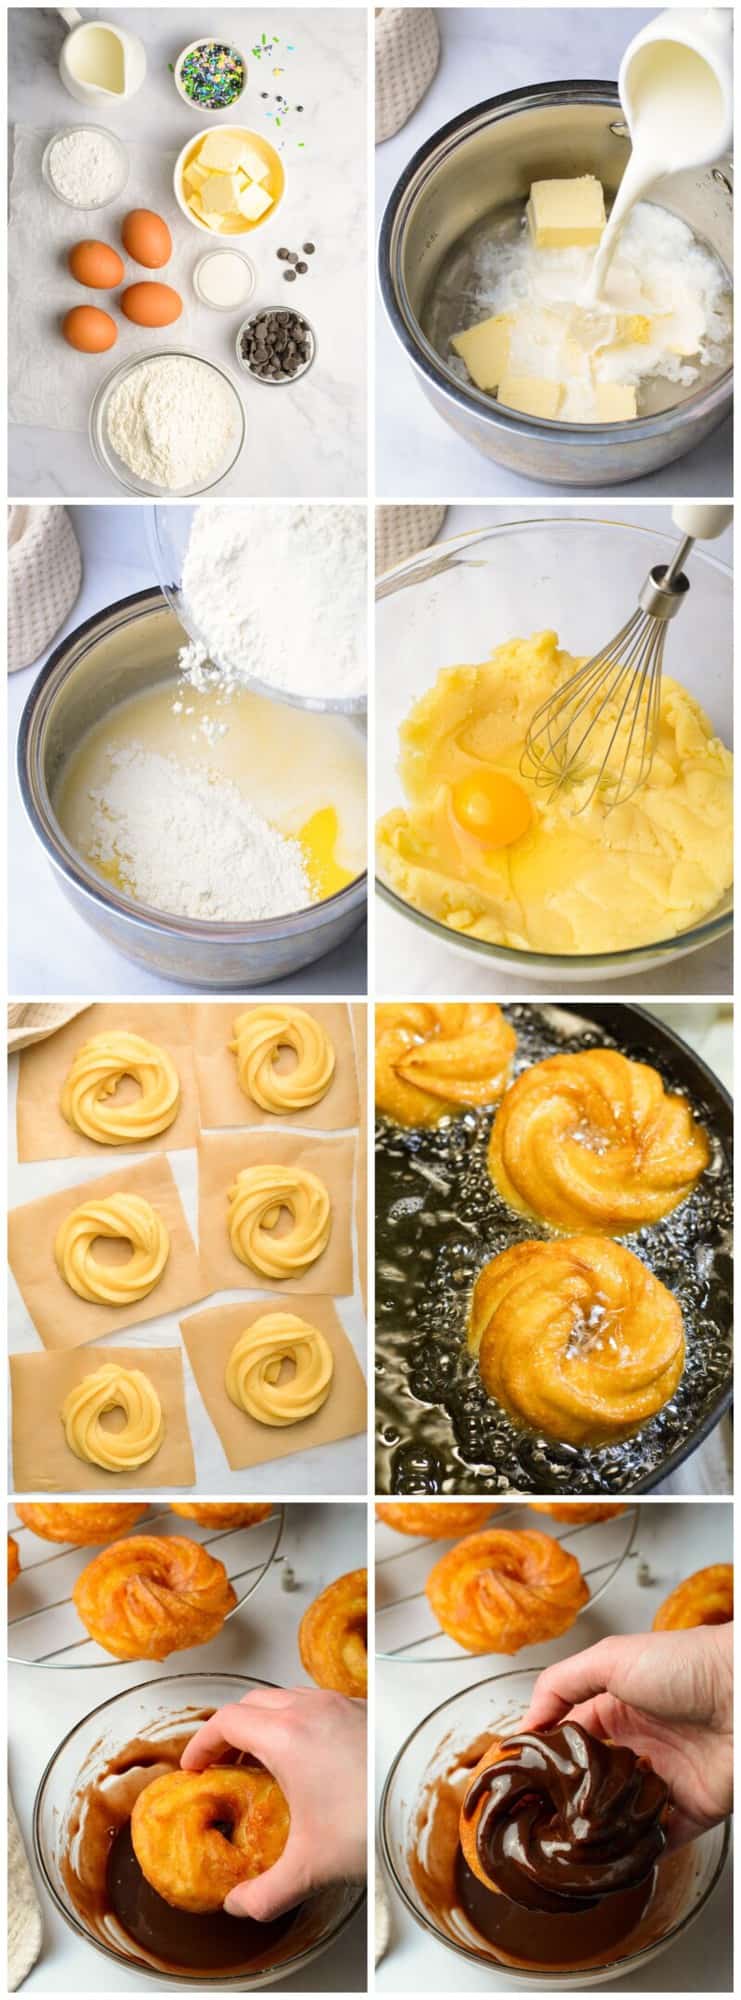 step by step photos for how to make chocolate glazed crullers